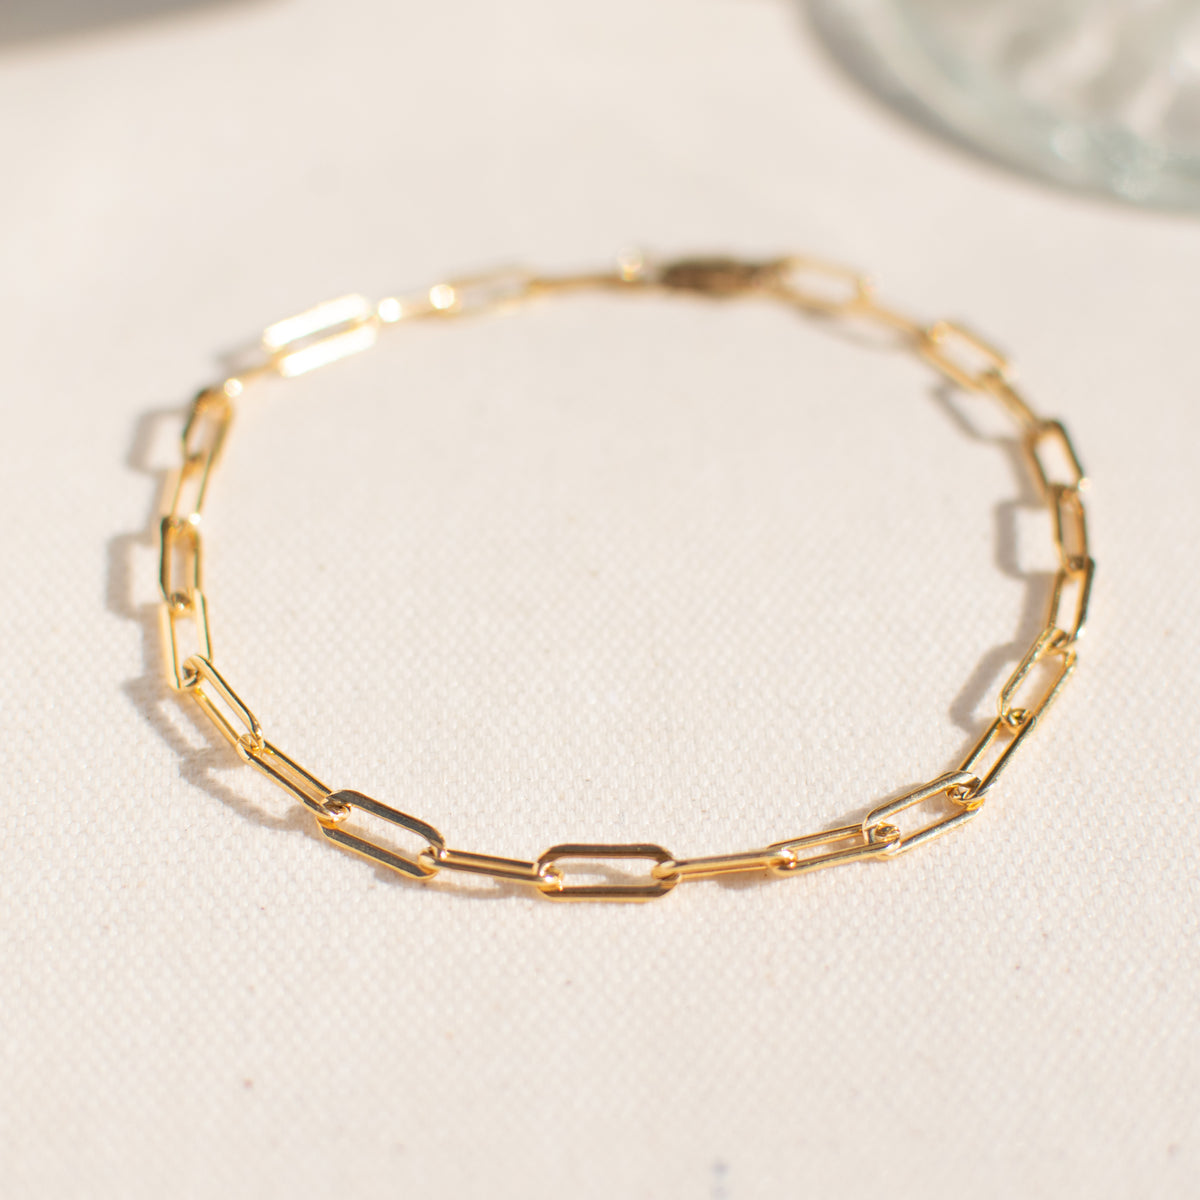 Close up of the bold link bracelet only partially focused in the front on a white background.